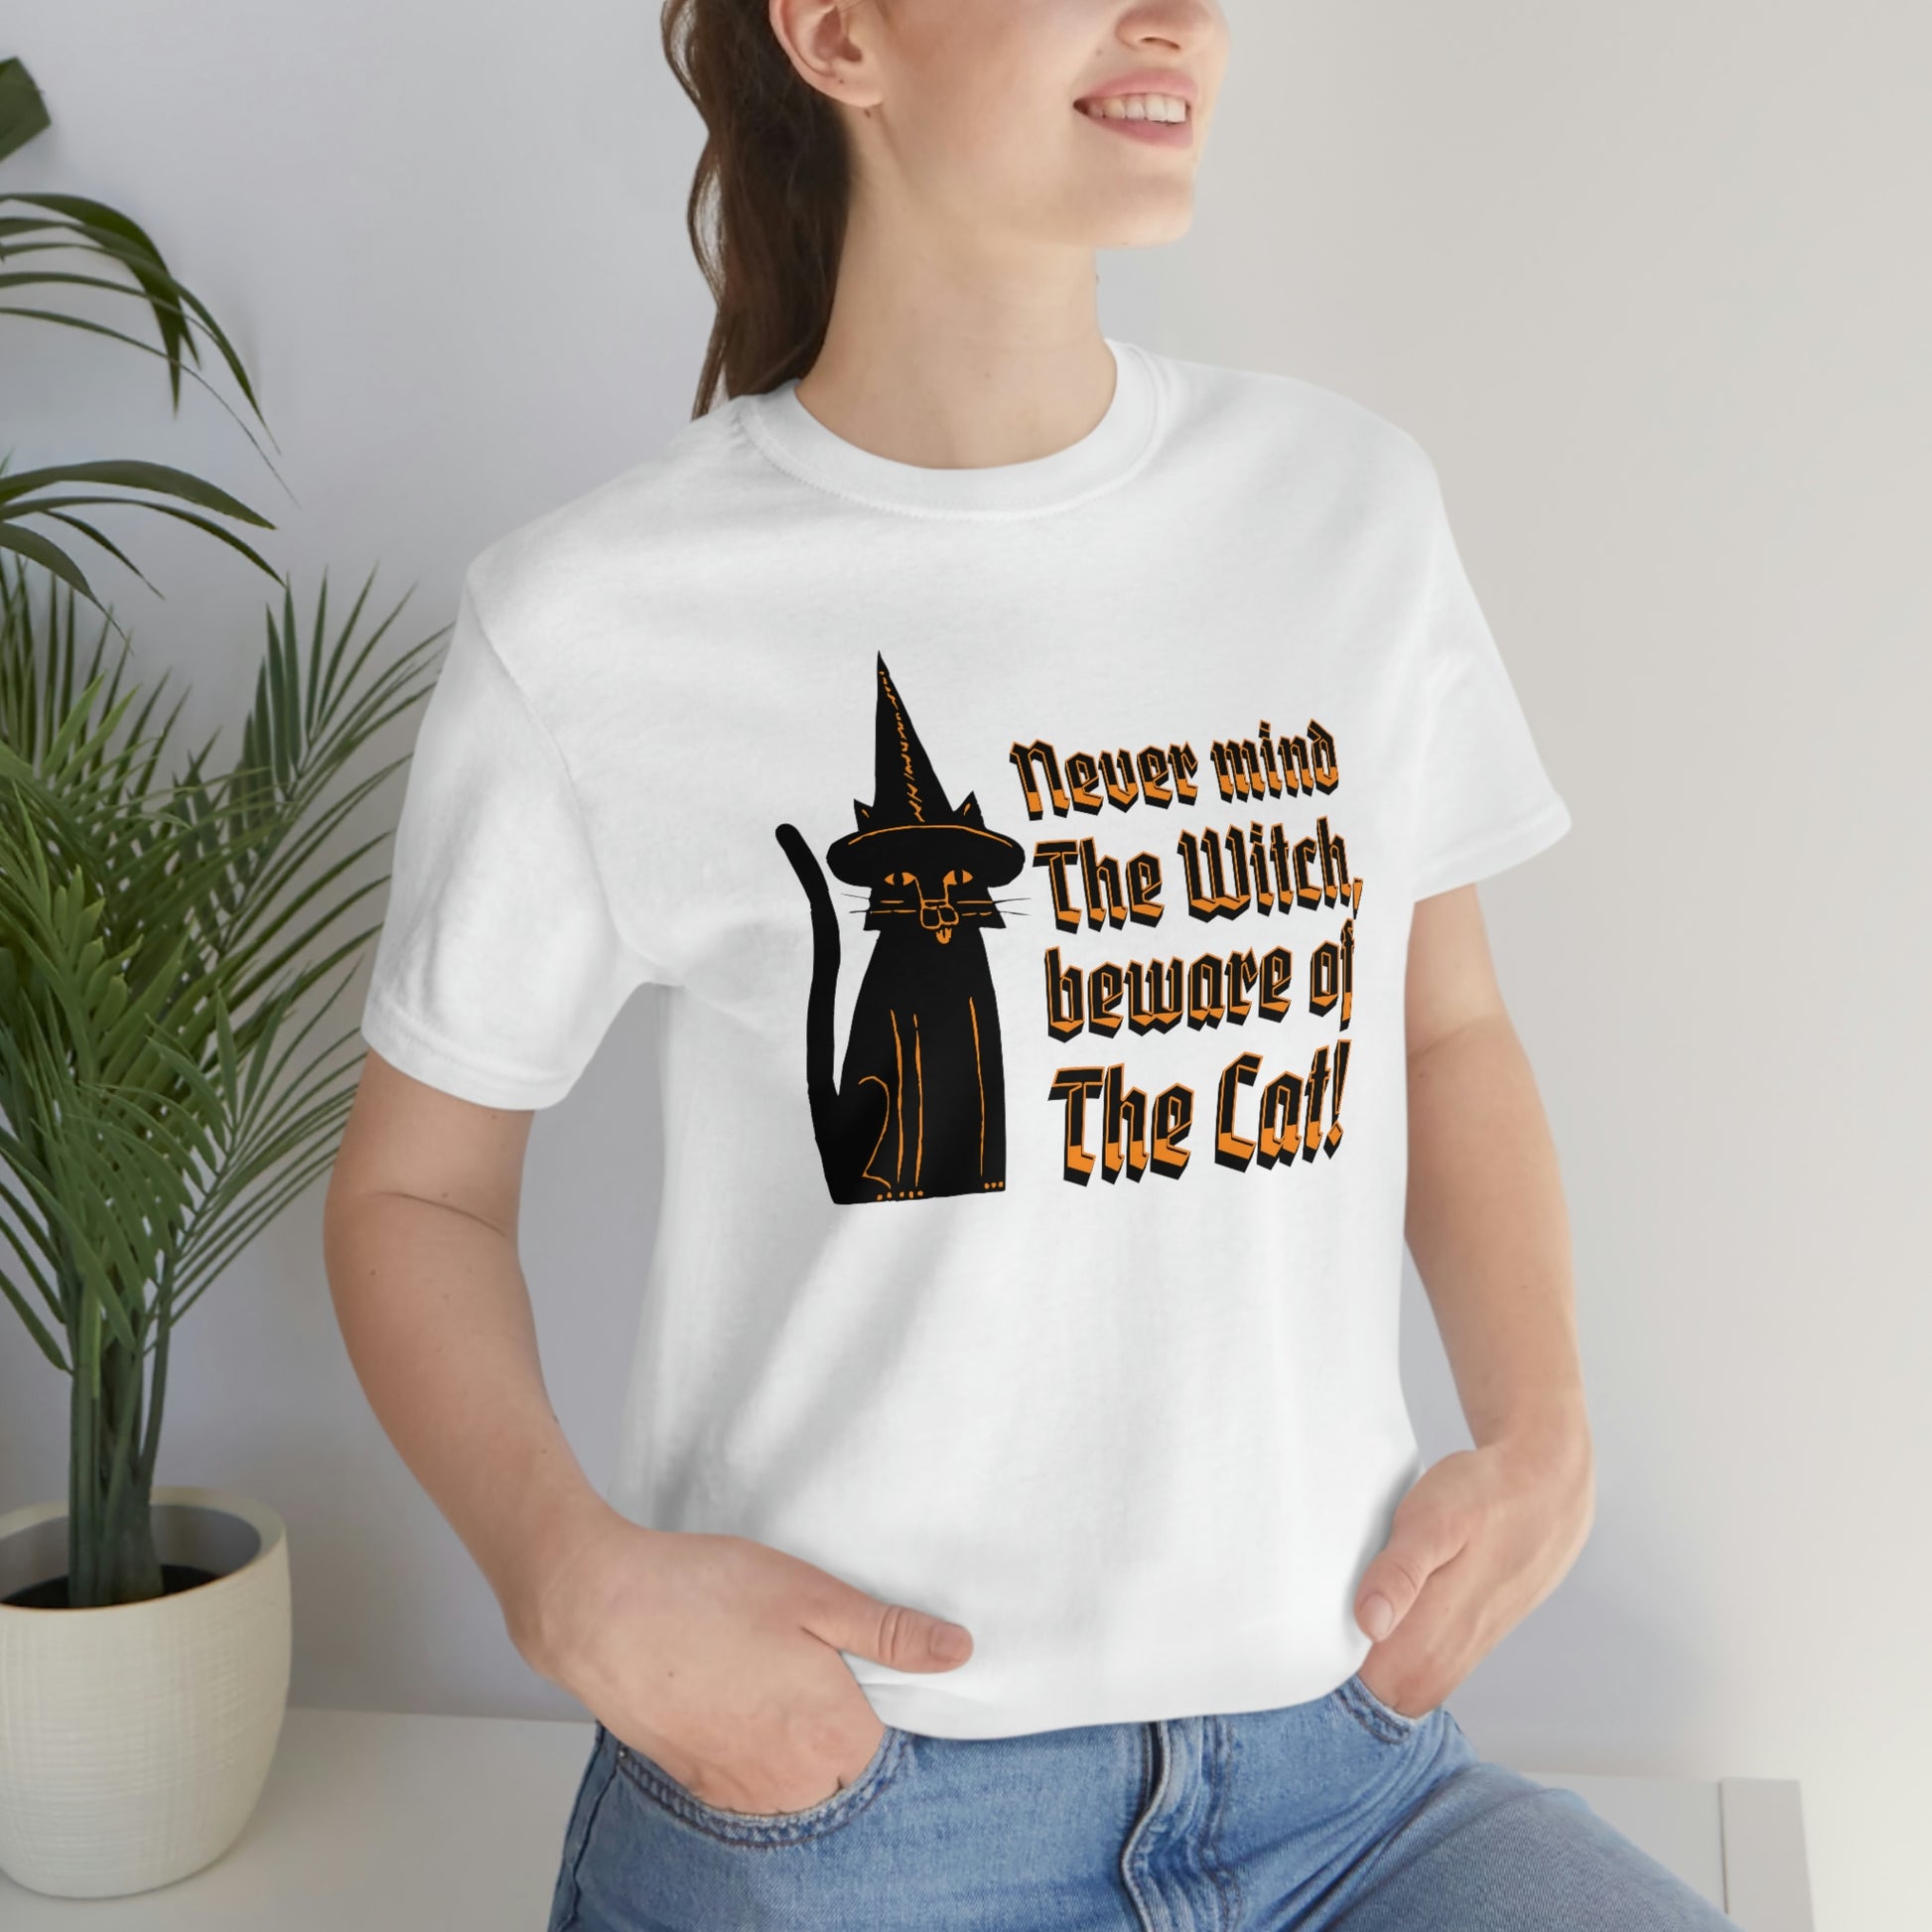 Witchy black cat T-shirt, witch cat familiar shirt, vintage tshirt, aesthetic shirt, celestial shirt, magical tee, mystical tee, gothic tee